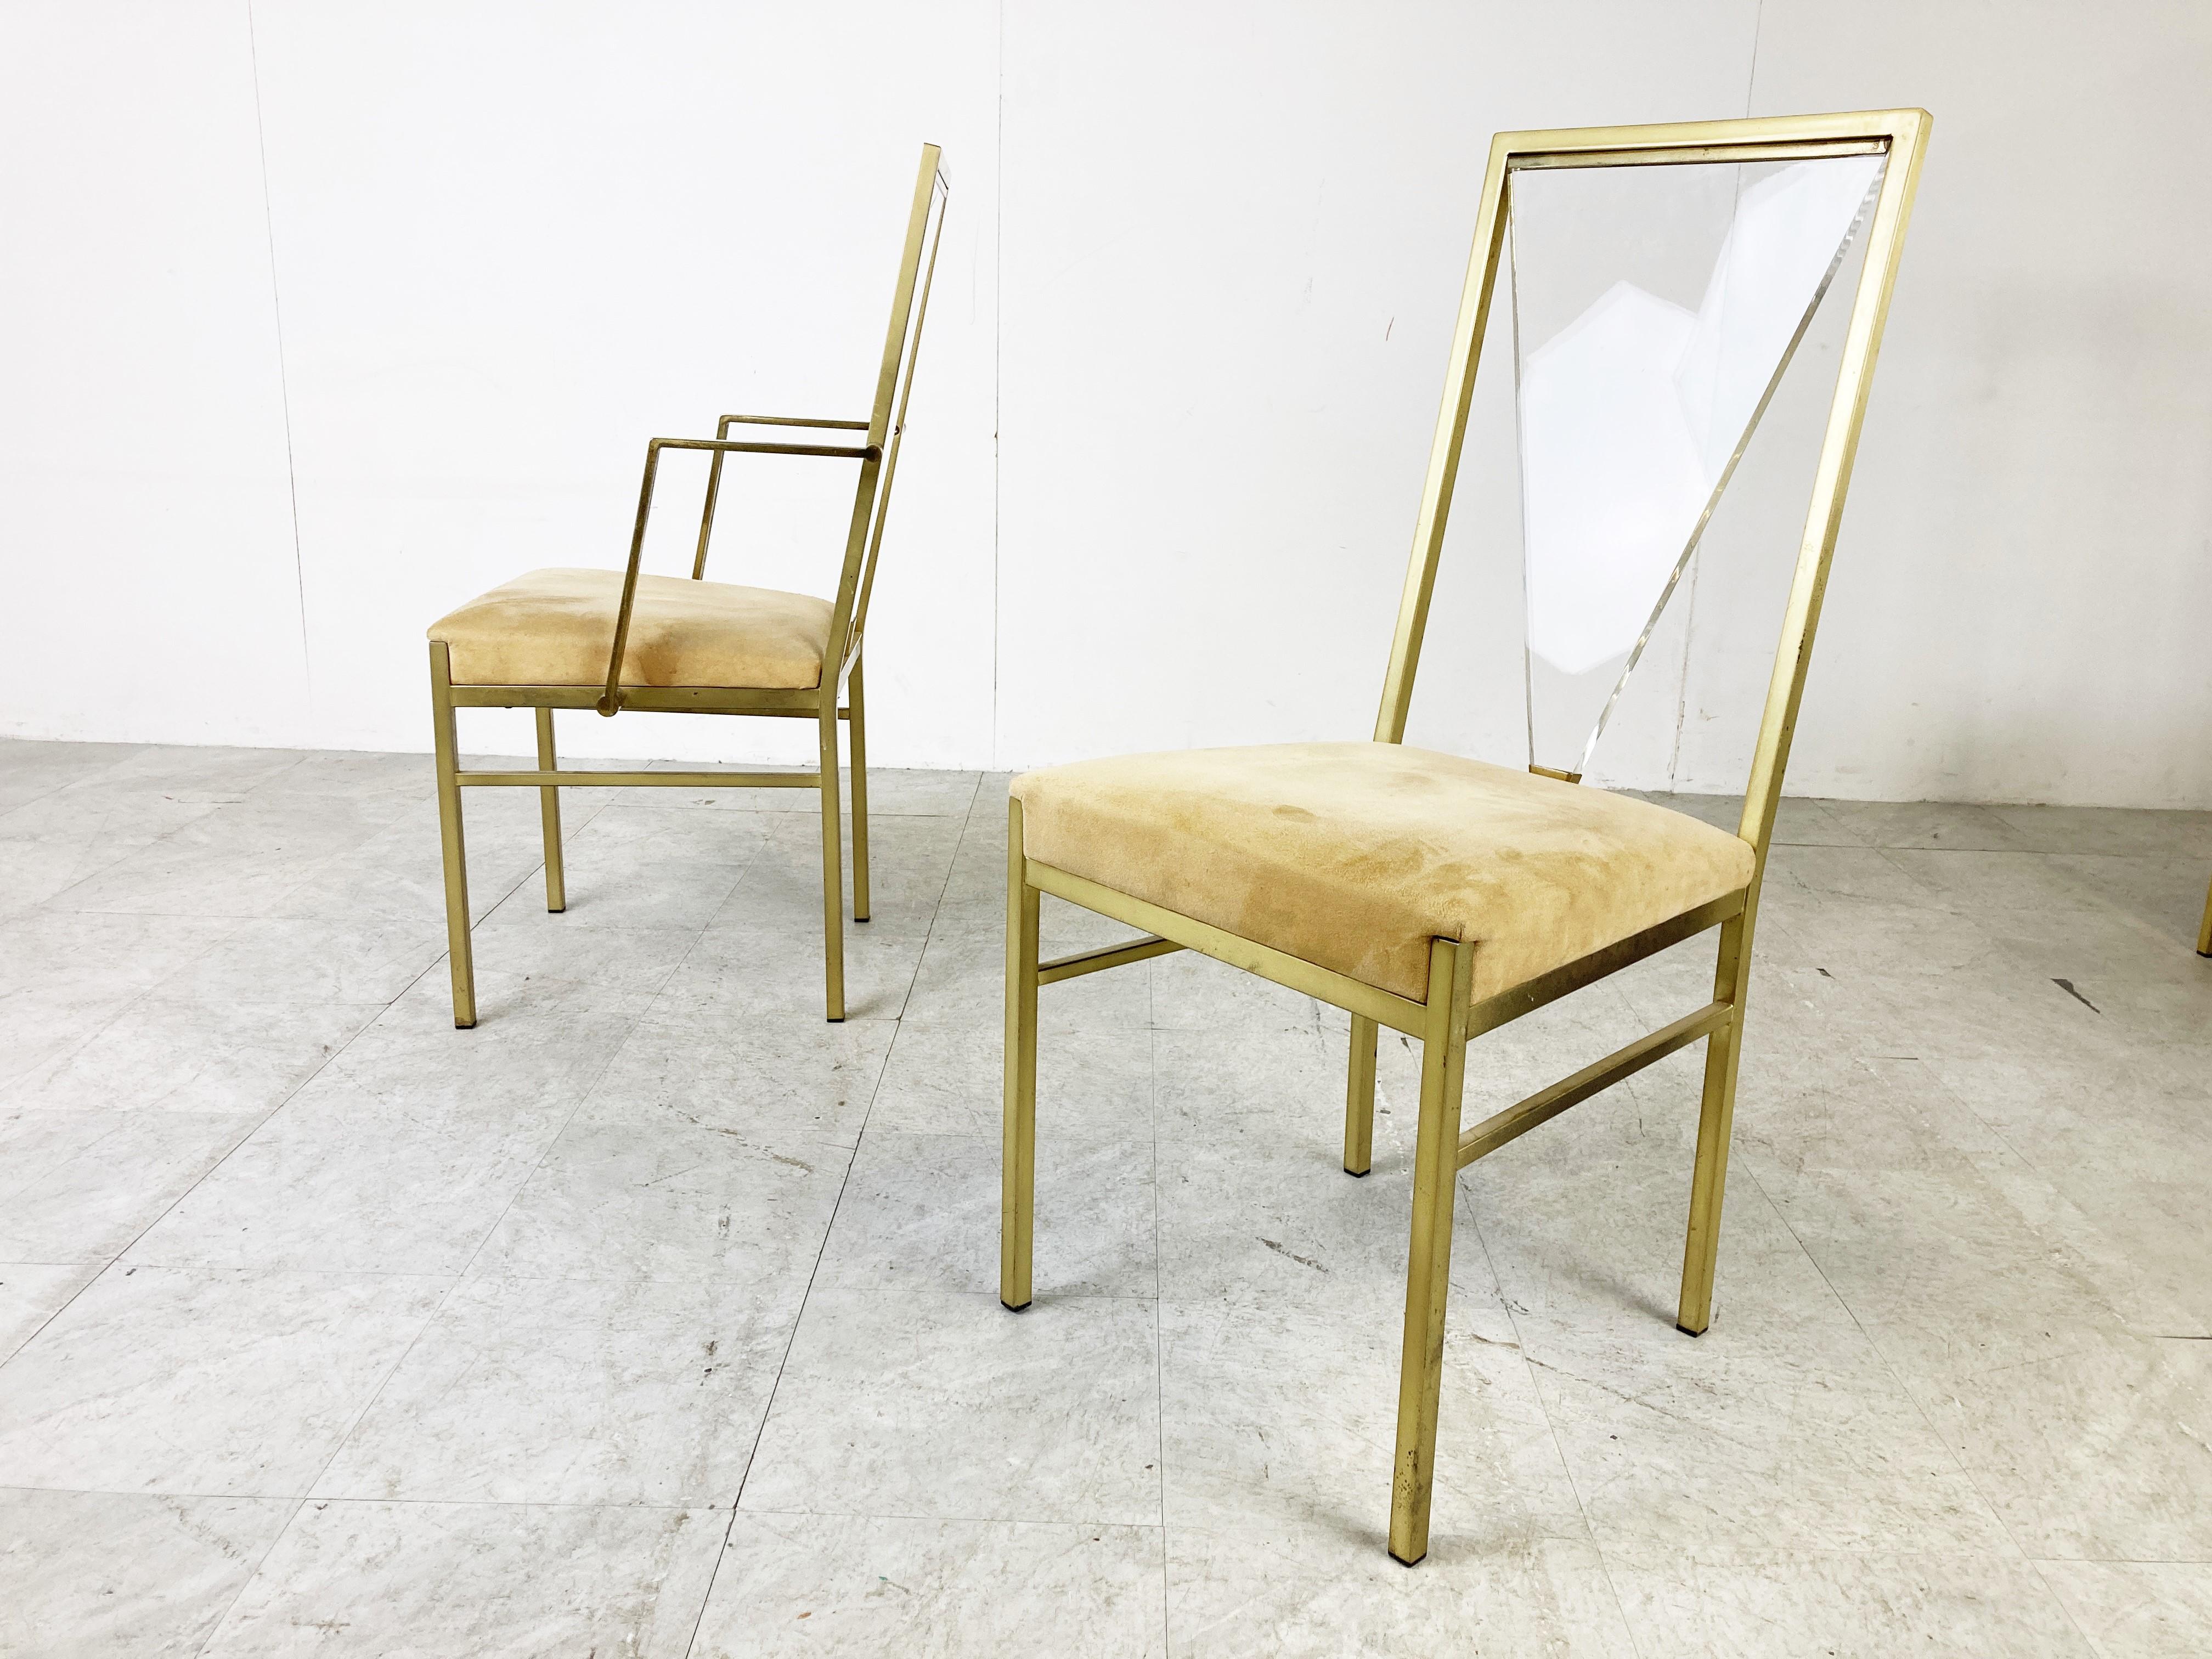 Set of 8 brass and lucite back dining chairs by Belgocrhom with a beige alcantara upholstery.

2 out of 8 chairs have armrests, as they where usually put at the table's end.

These chairs bring up the seventies and eighties glam atmosphere back